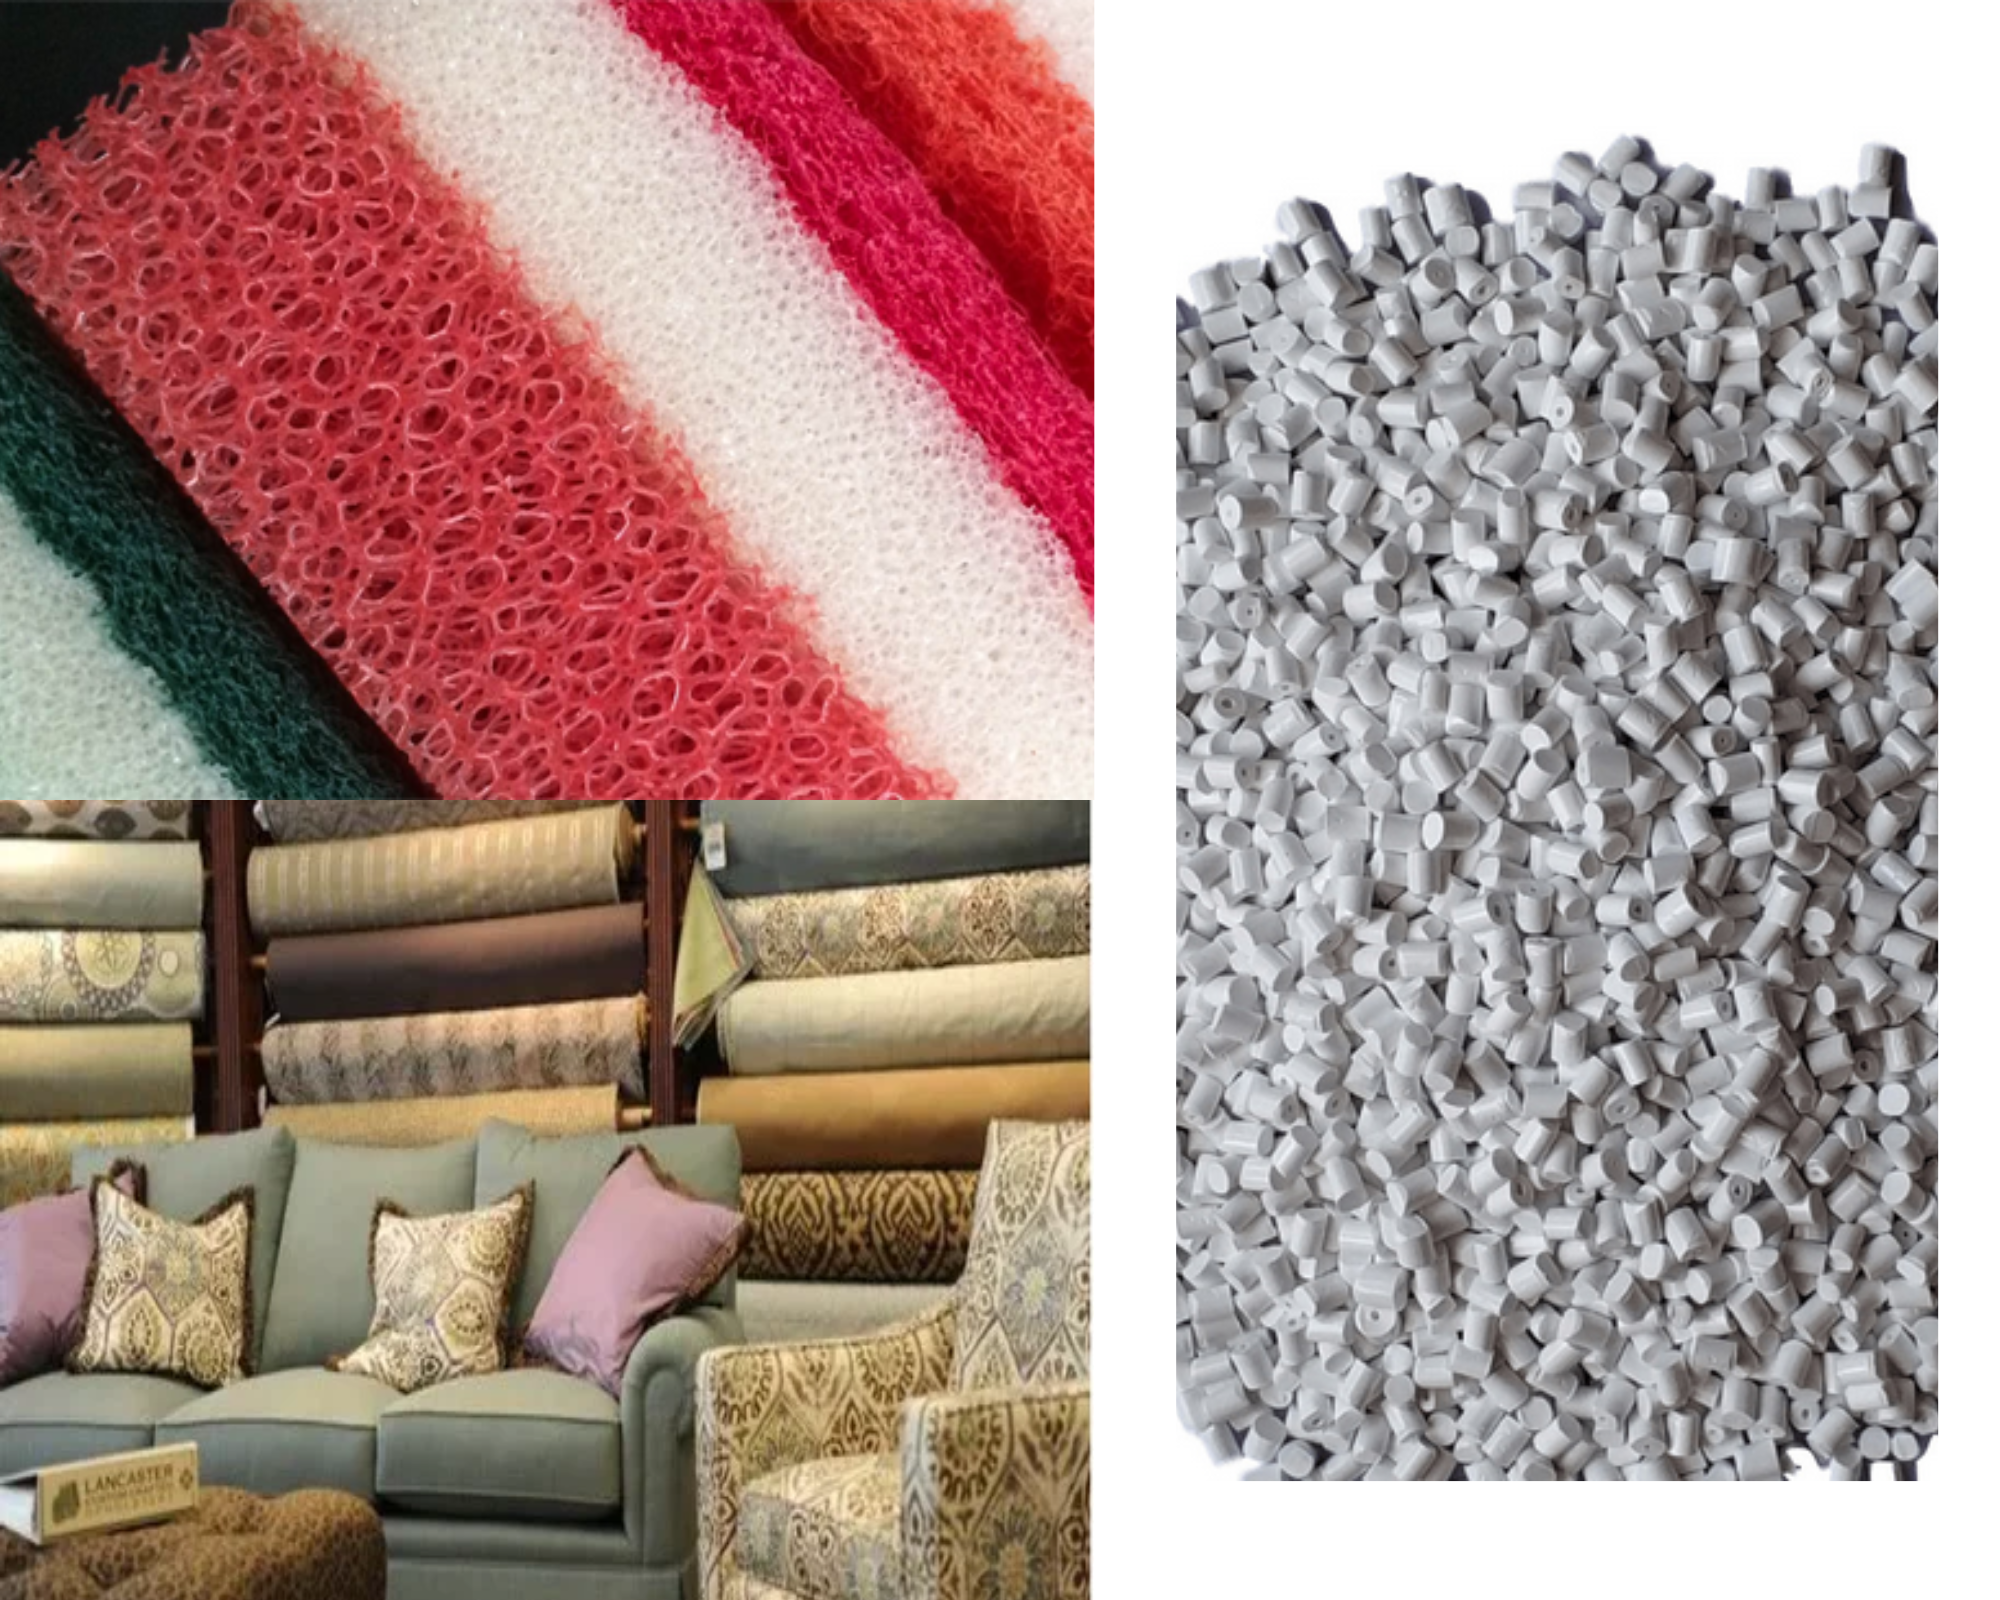 Furniture and Upholstery Fire Safety: The Role of Intumescent Flame Retardants